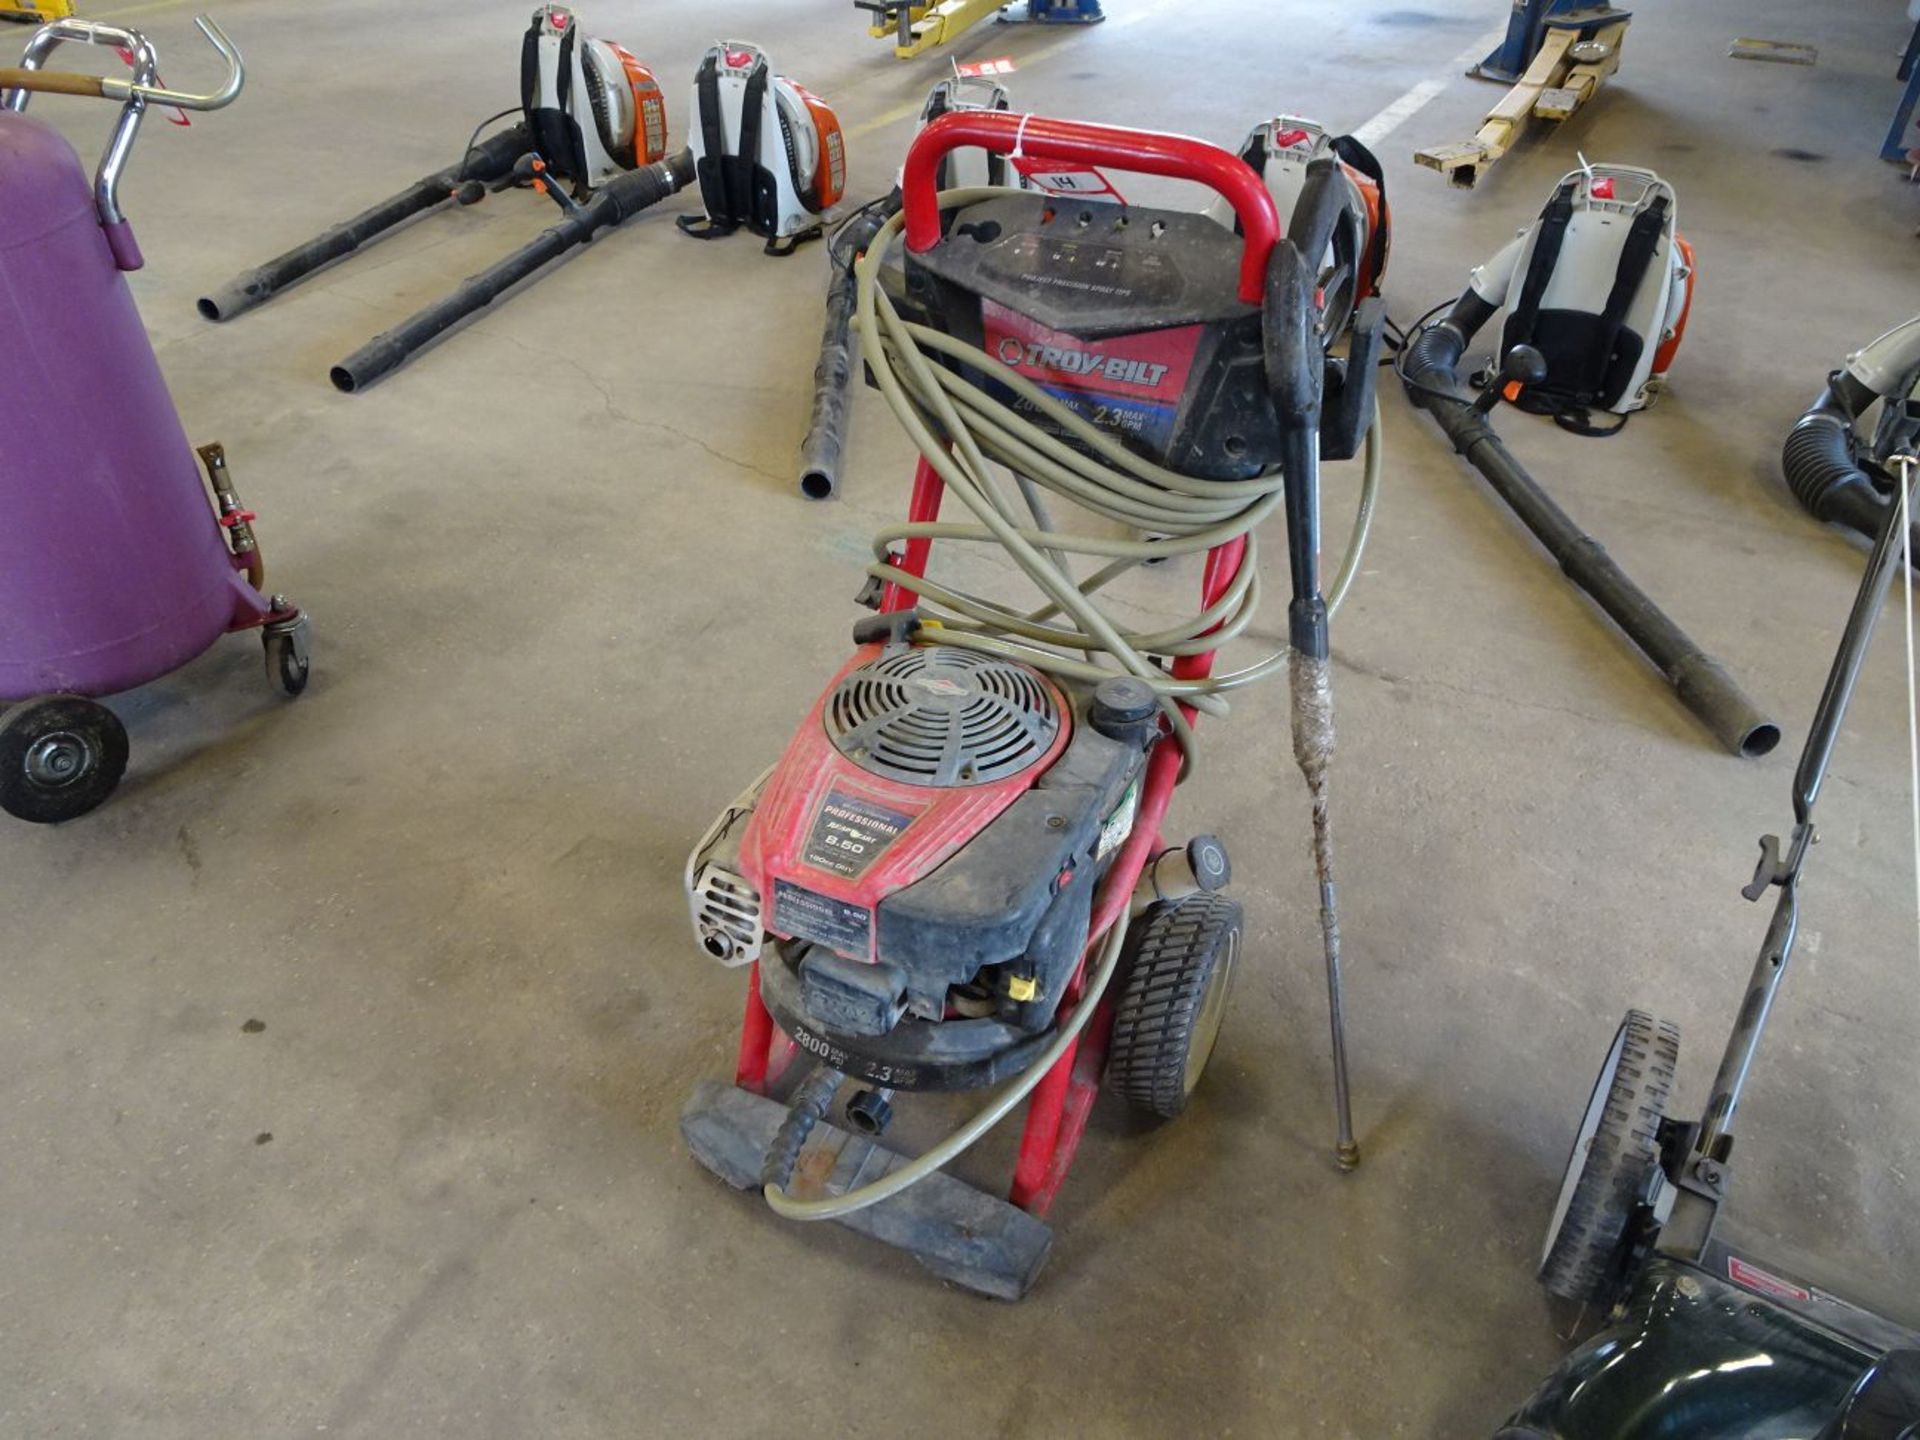 TROY BILT PRESSURE WASHER WITH HOSE AND WAND, 2800 MAX PSI (LOCATION: SHOP) - Image 3 of 4